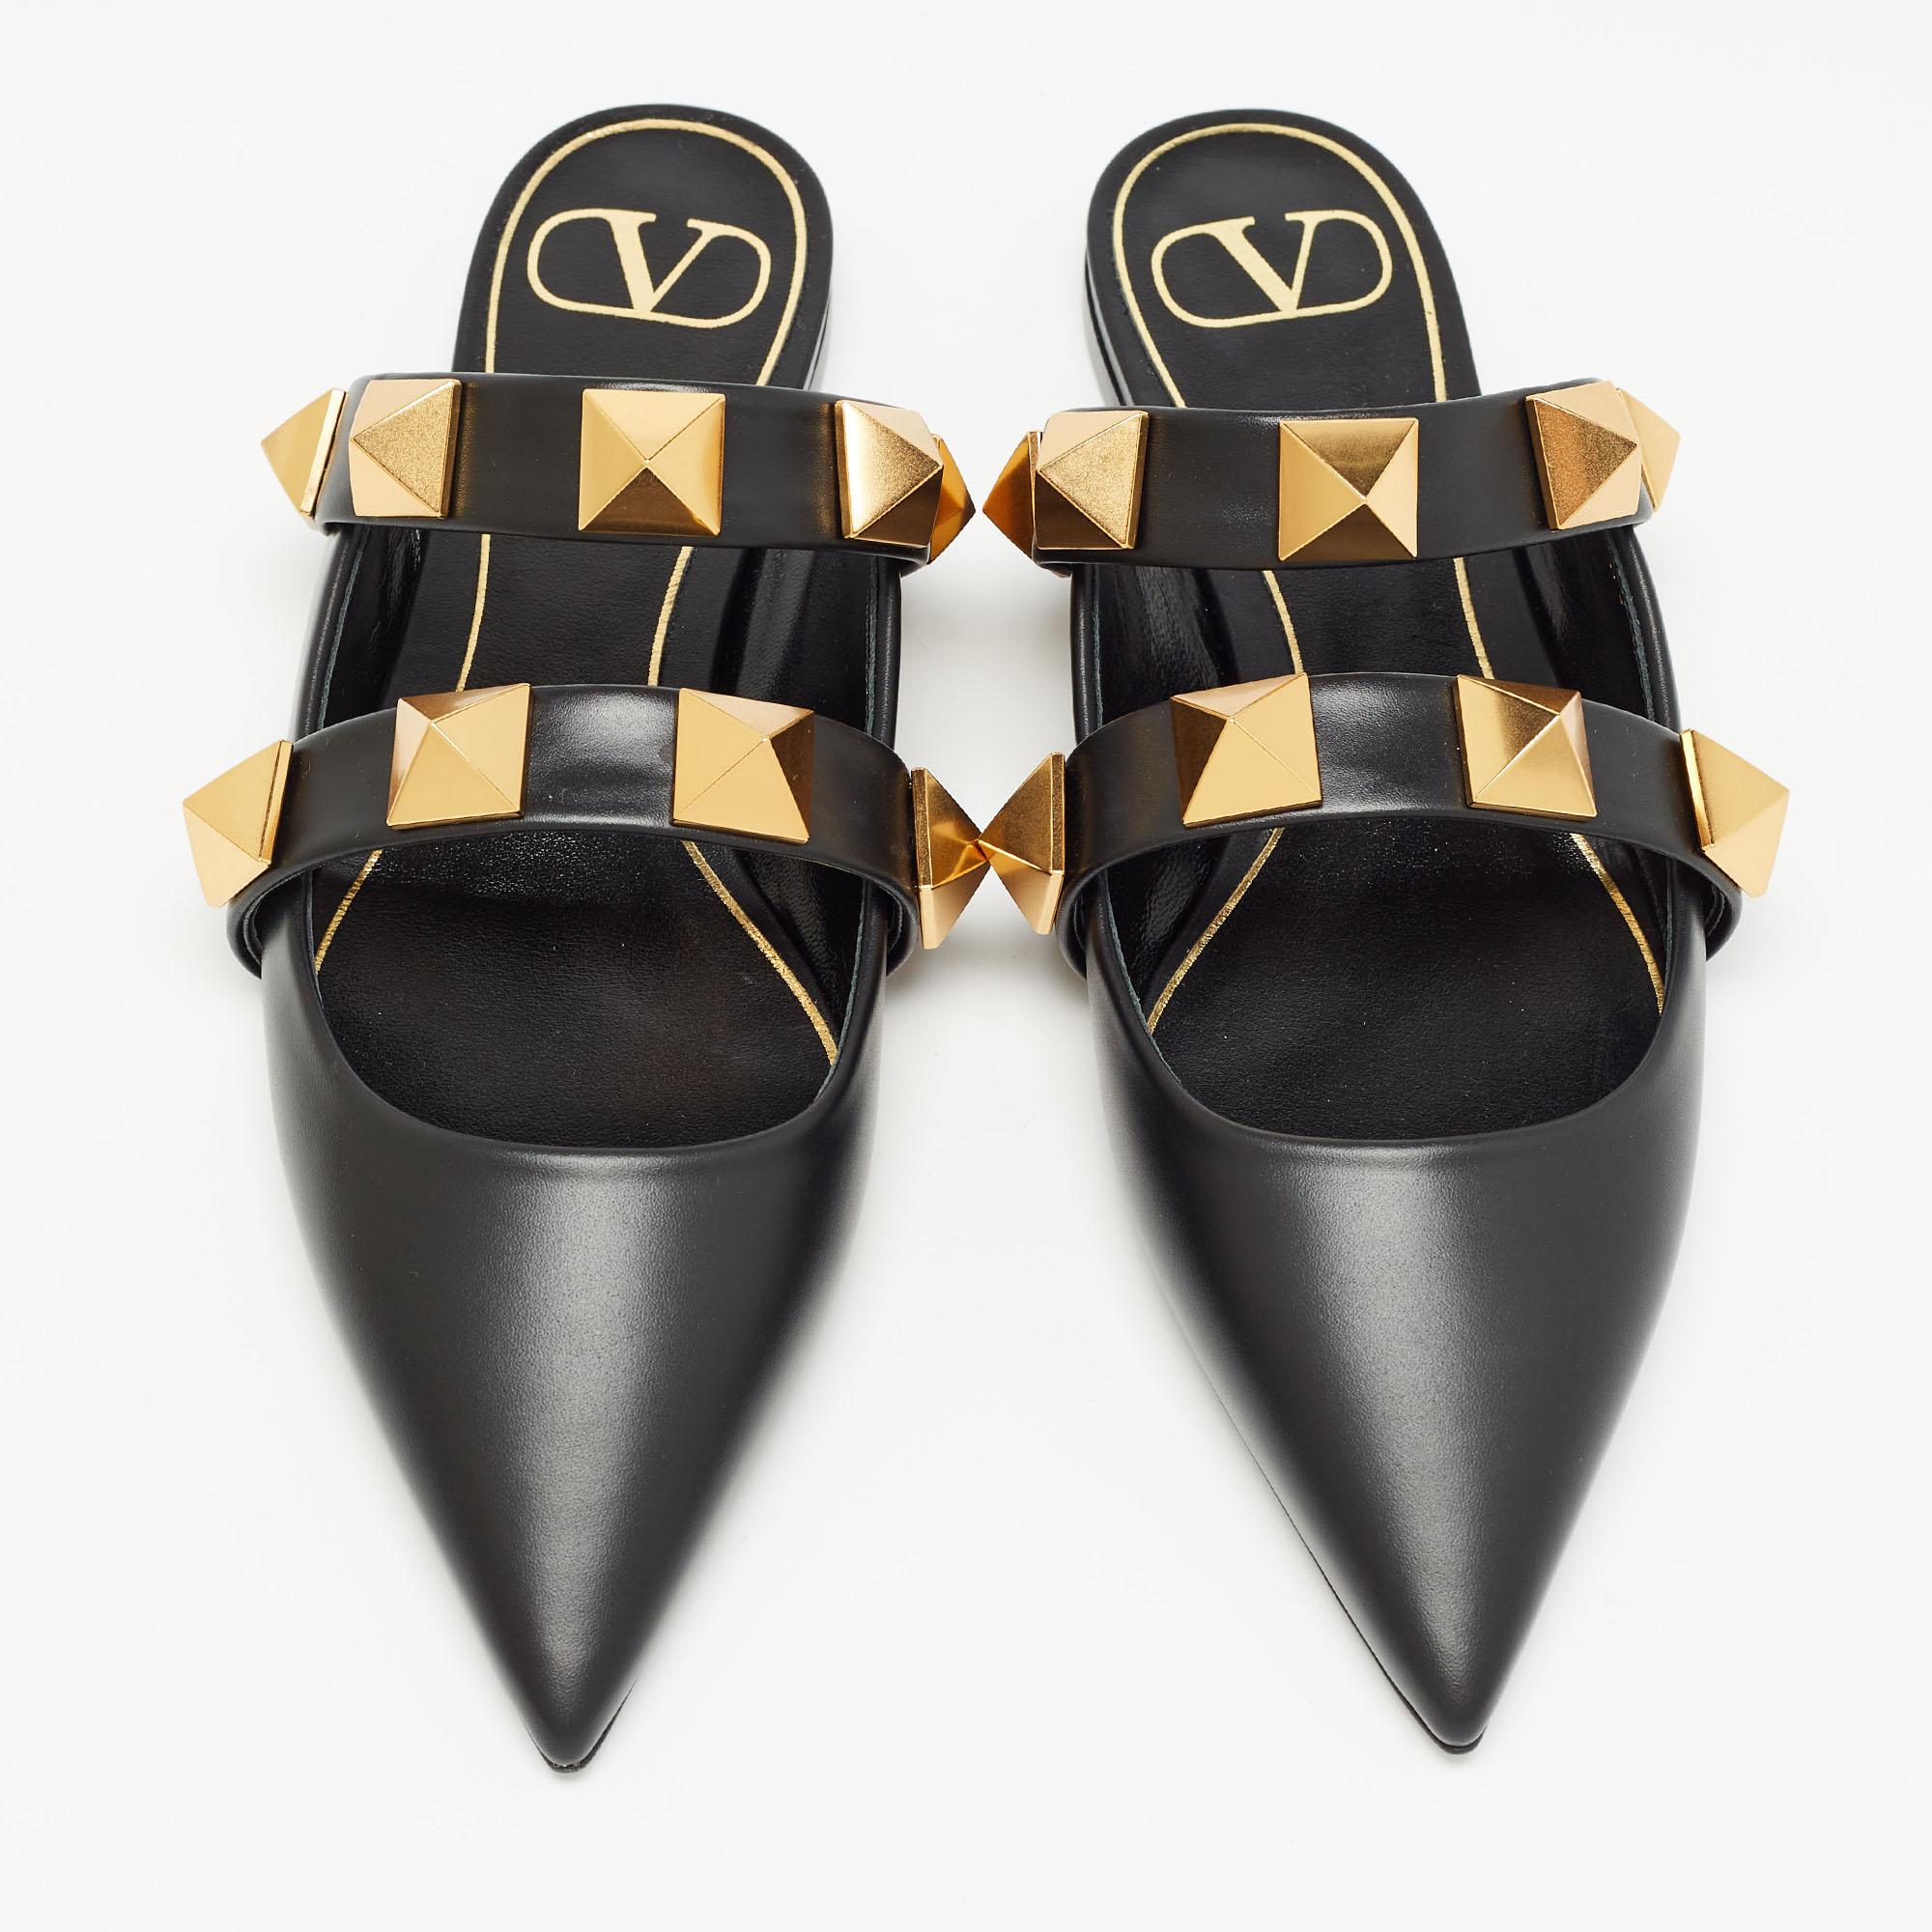 Valentino shoes are known for their unique designs that emanate the label's feminine verve and immaculate craftsmanship that makes their creations last season after season. Crafted from leather in a versatile black shade, the straps are adorned with